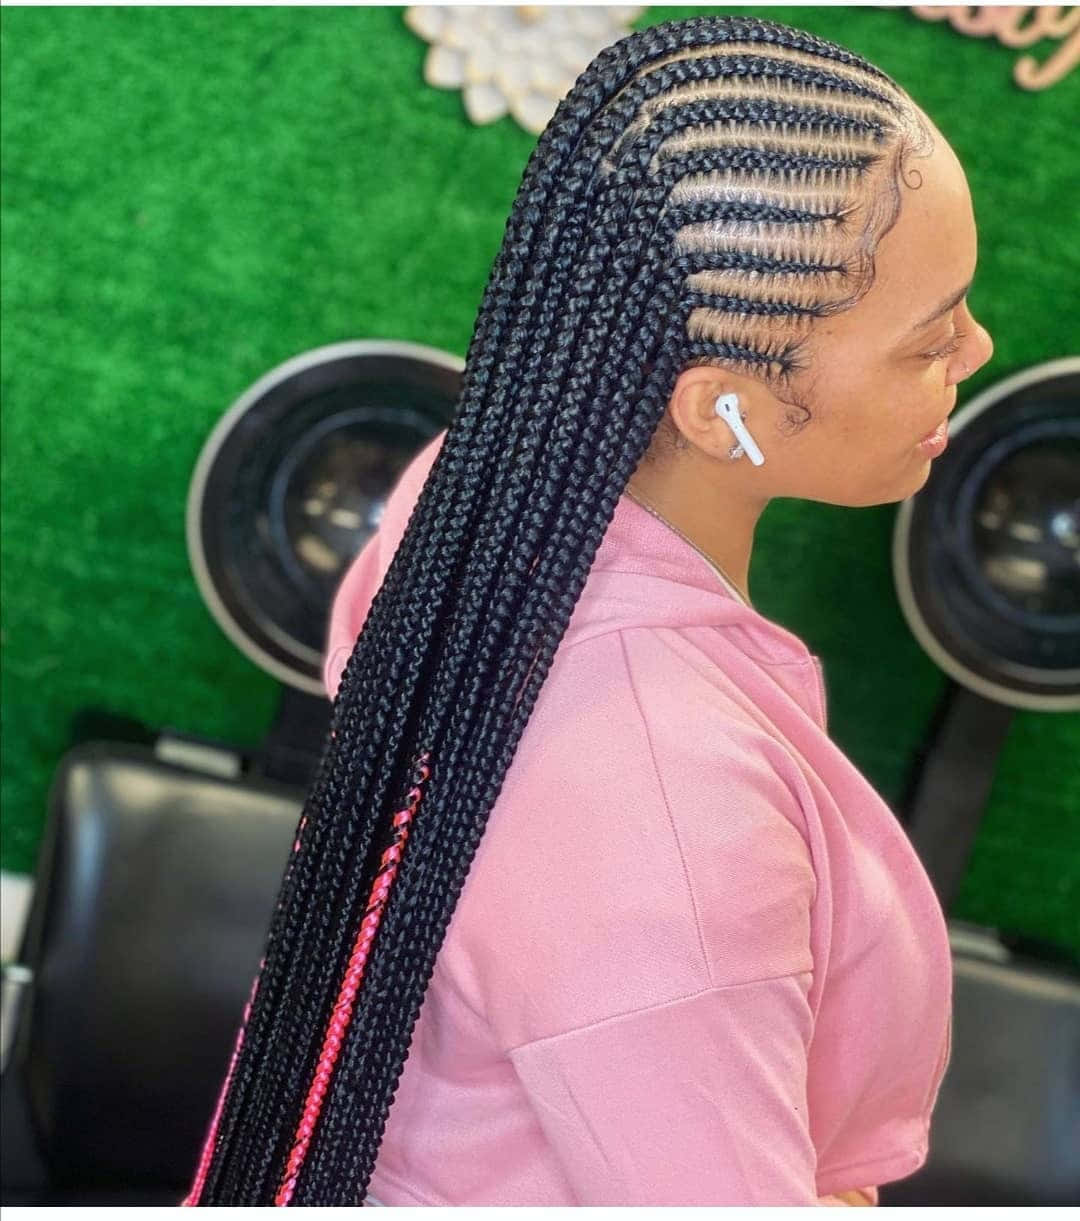 Download A Woman With Braids In Her Hair | Wallpapers.com